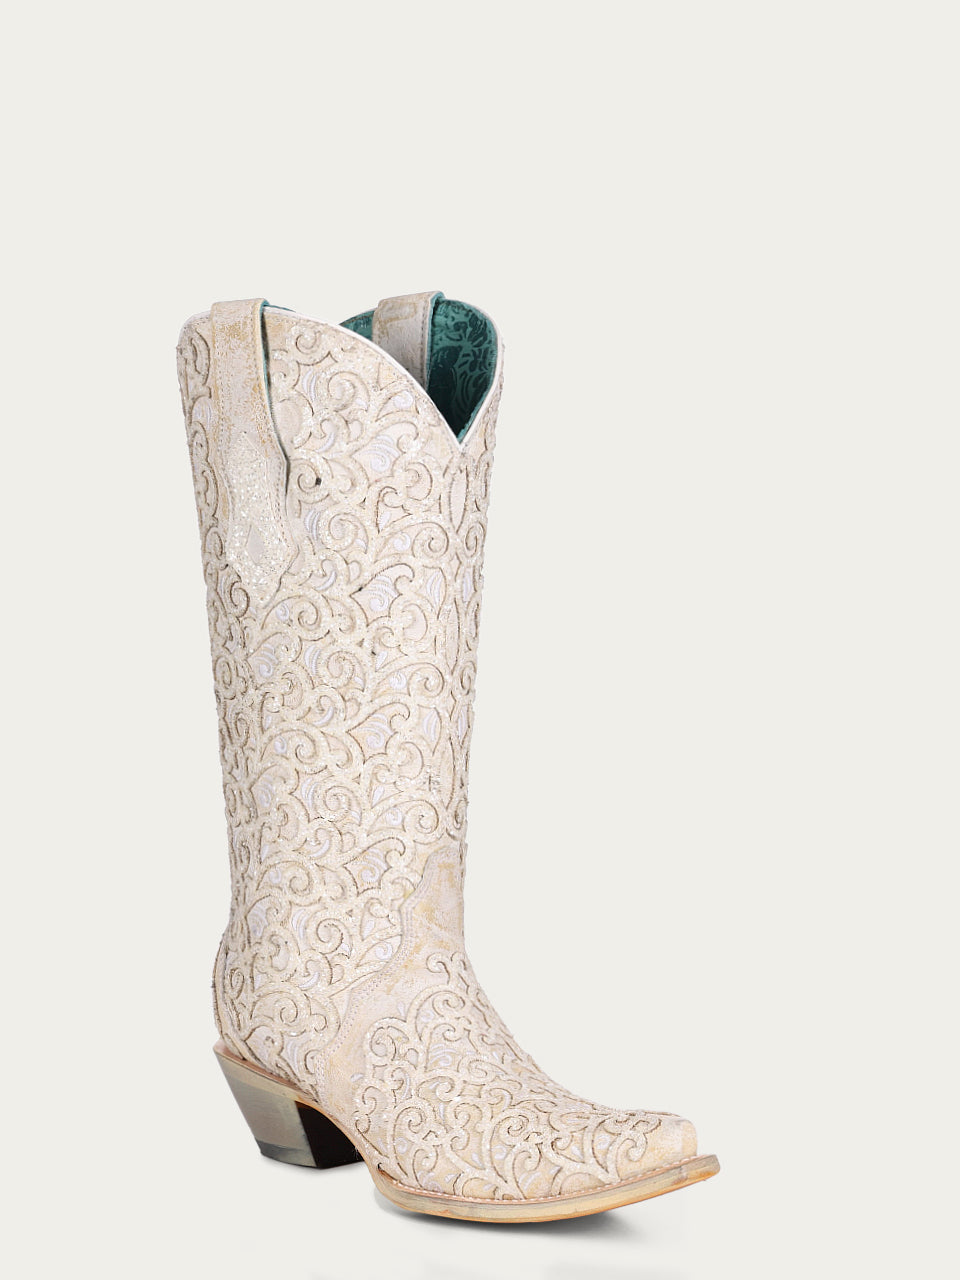 C4050 - WOMEN'S WHITE GLITTER OVERLAY AND EMBROIDERY TRIAD SNIP TOE COWBOY BOOT